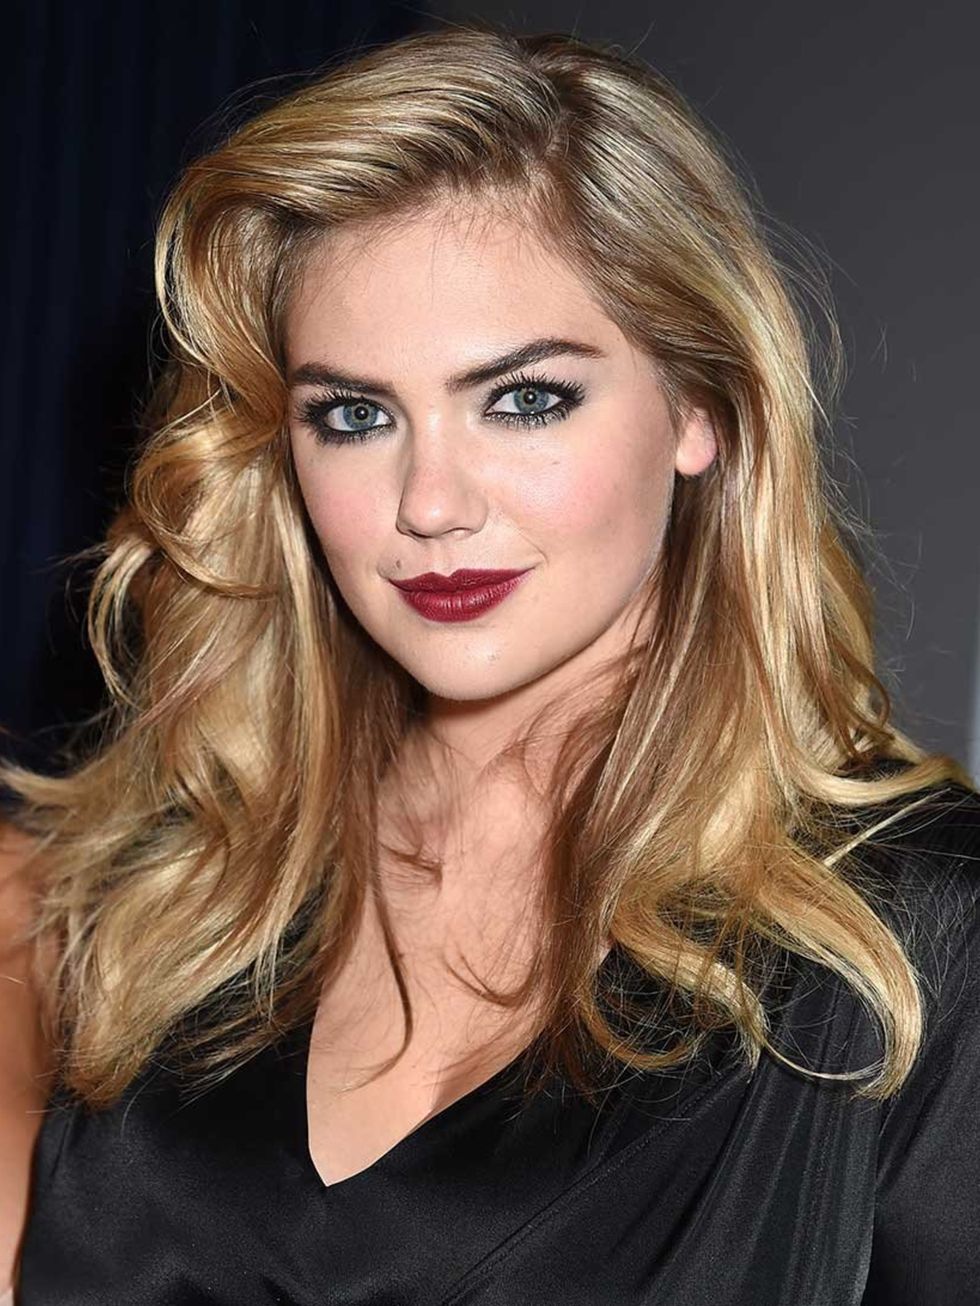 &lt;p&gt;&lt;a href=&quot;http://www.elleuk.com/beauty/news/kate-upton-bobbi-brown-new-face-katie-holmes&quot;&gt;Kate Upton&lt;/a&gt; pairs a retro hairstyle with a berry lip &lt;em&gt;and&lt;/em&gt; softly smoked eye.&lt;/p&gt;